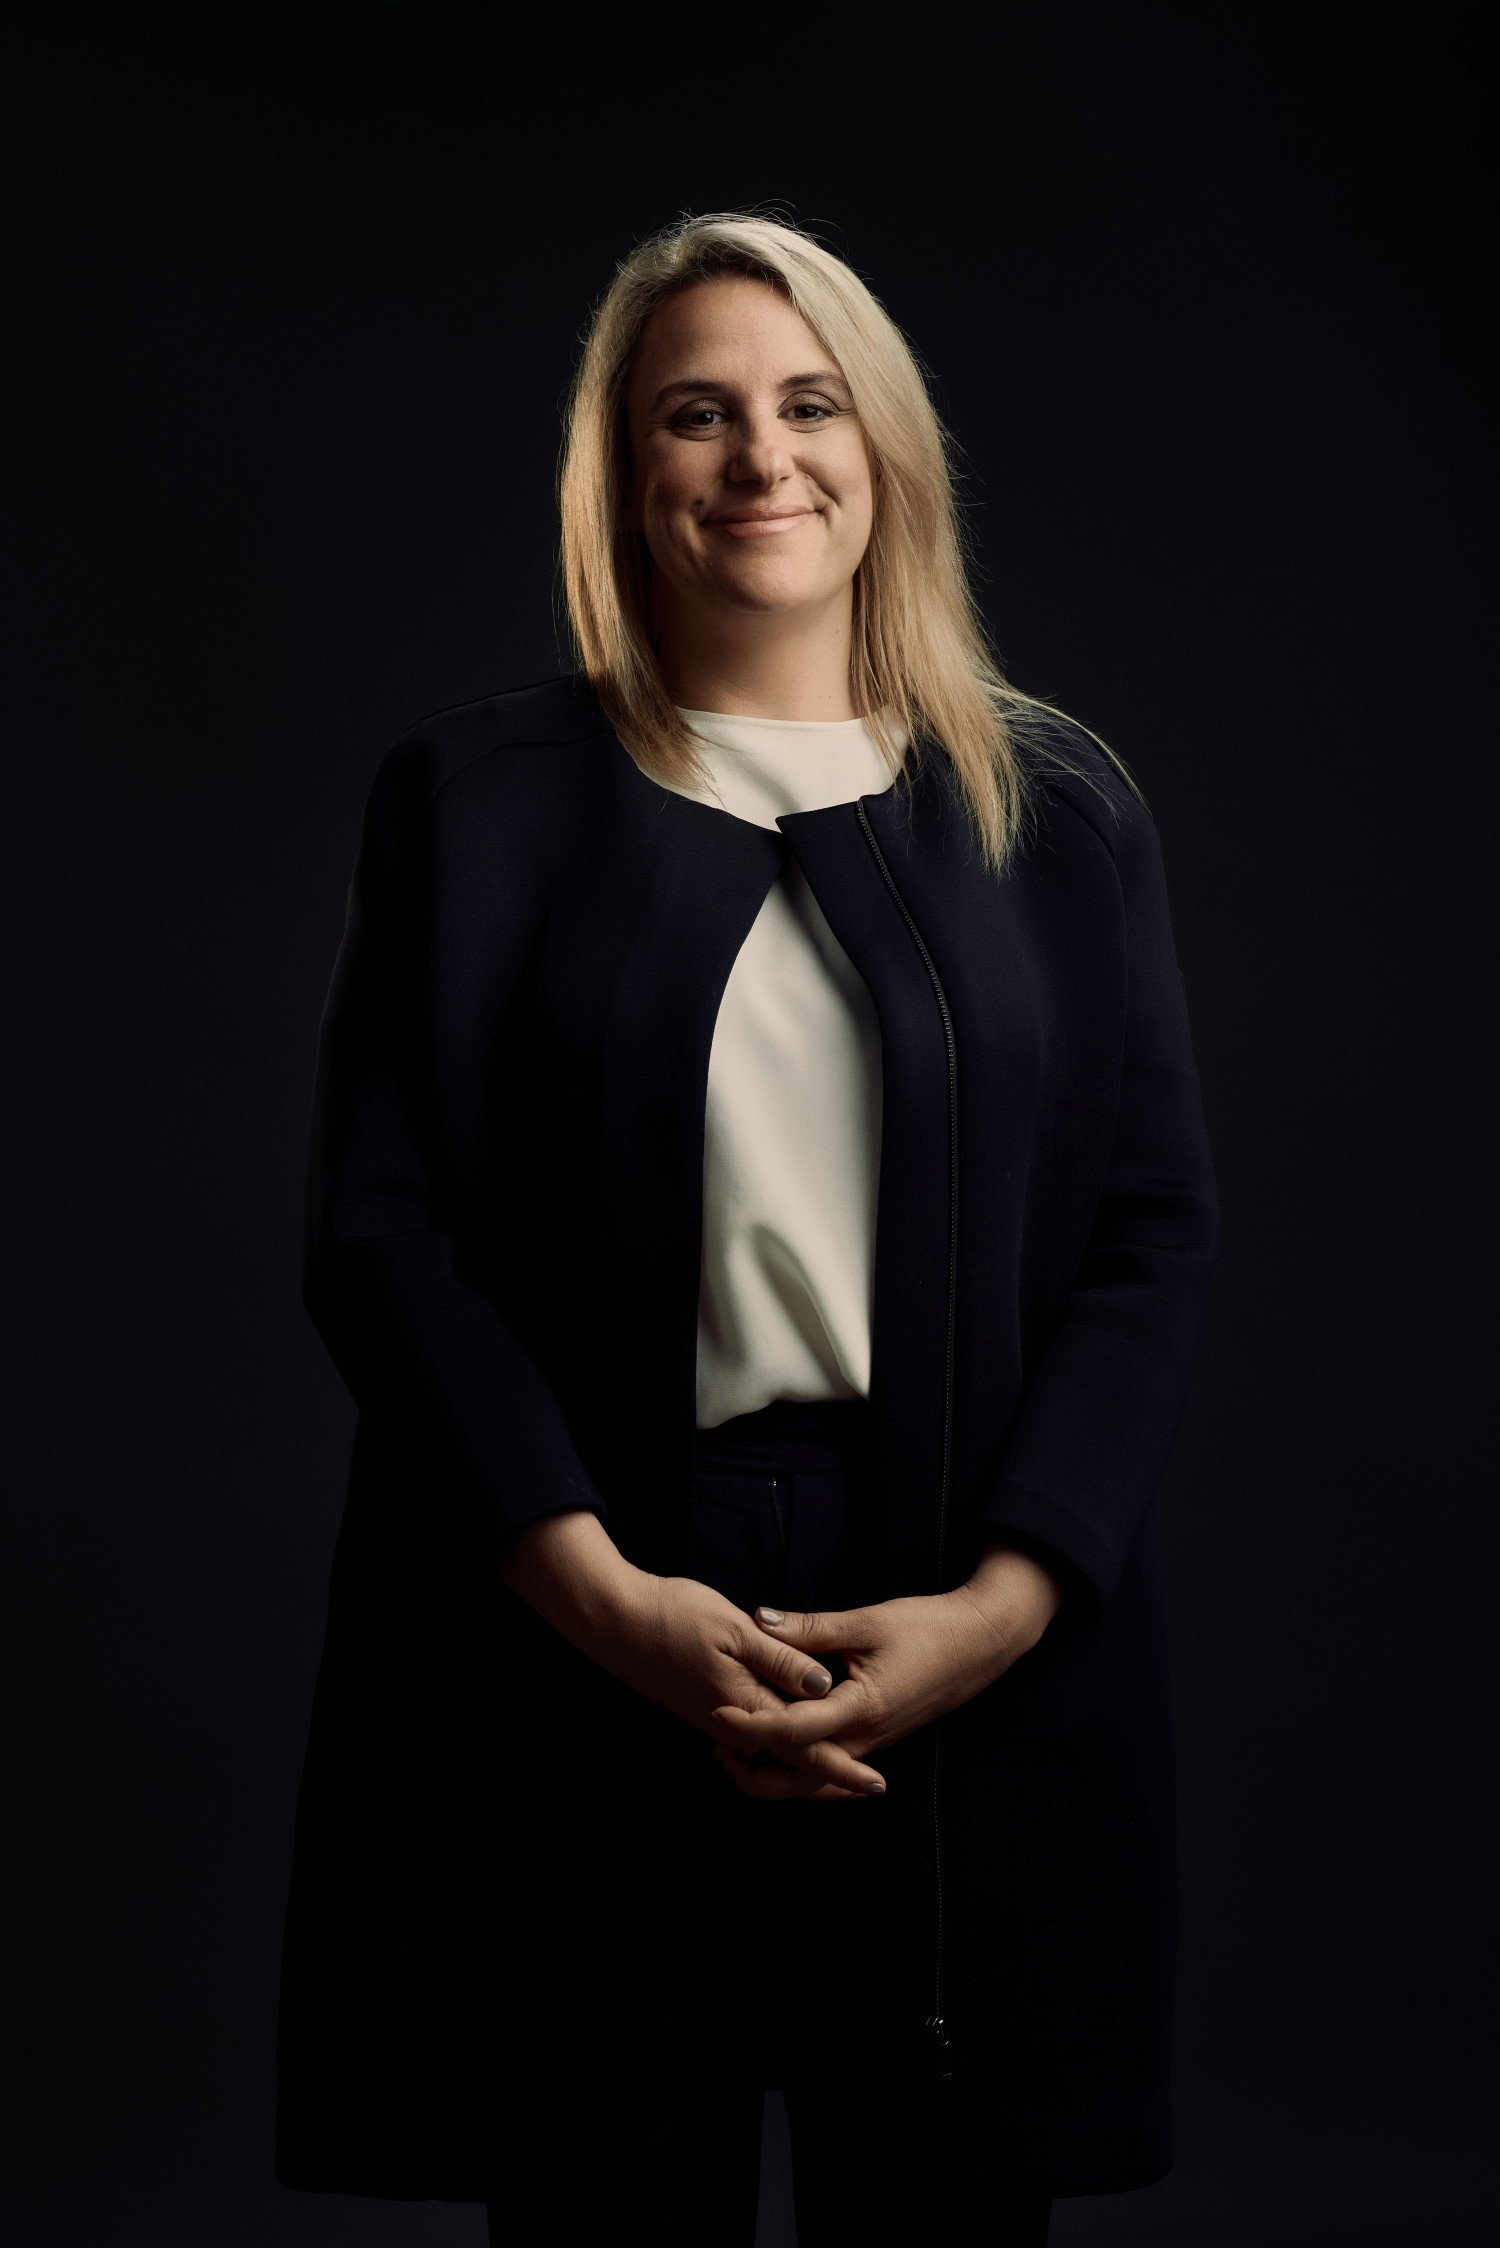 CE Family Law is pleased to announce the appointment of Lauren